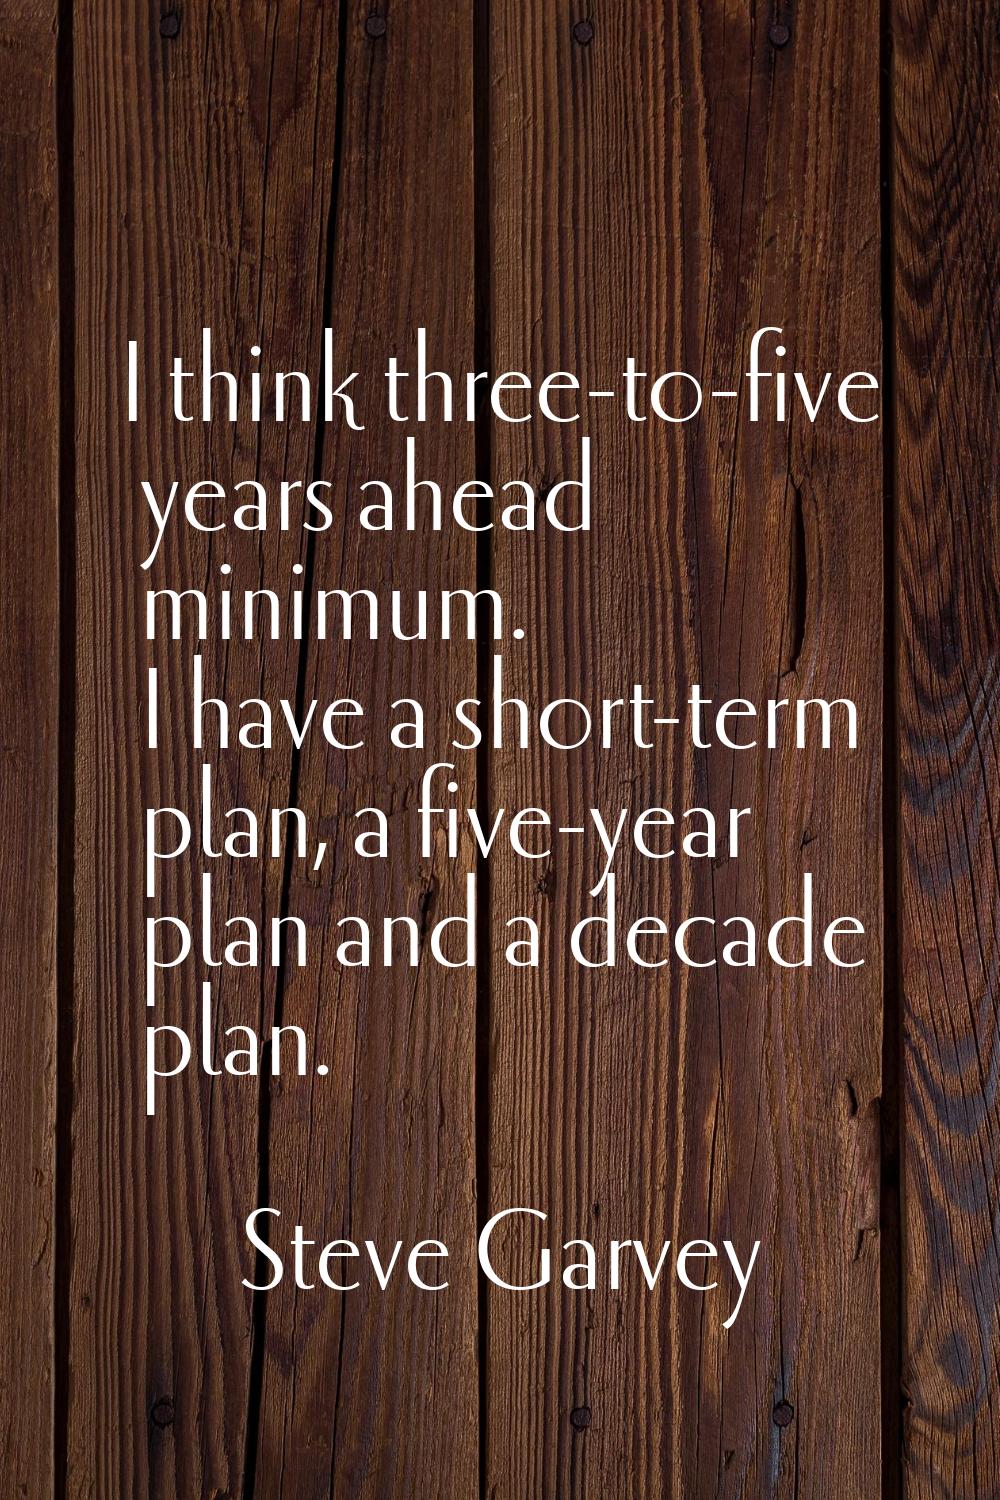 I think three-to-five years ahead minimum. I have a short-term plan, a five-year plan and a decade 